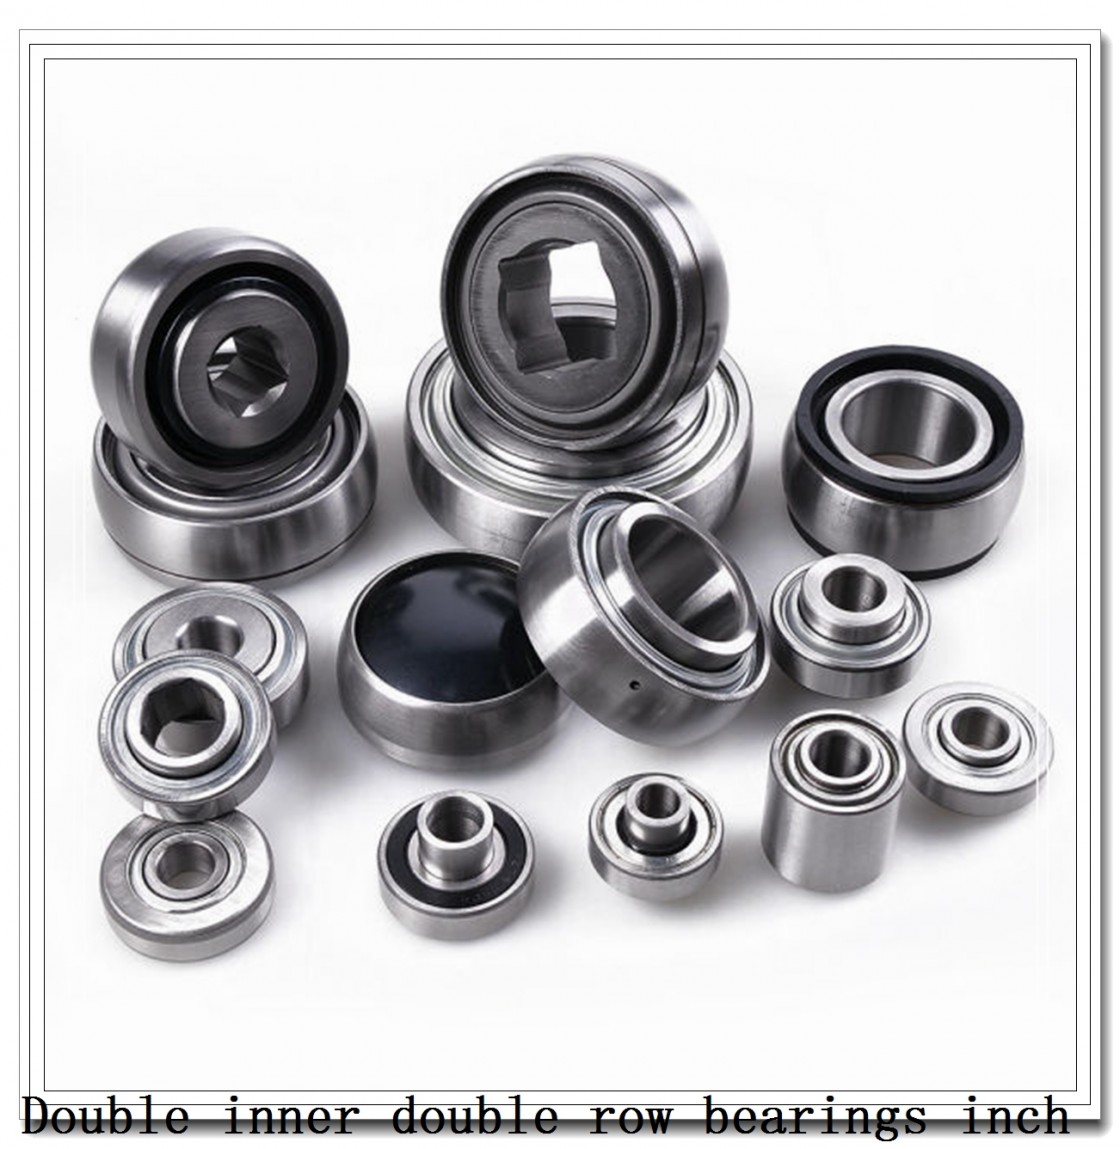 HM746646/HM746610D Double inner double row bearings inch